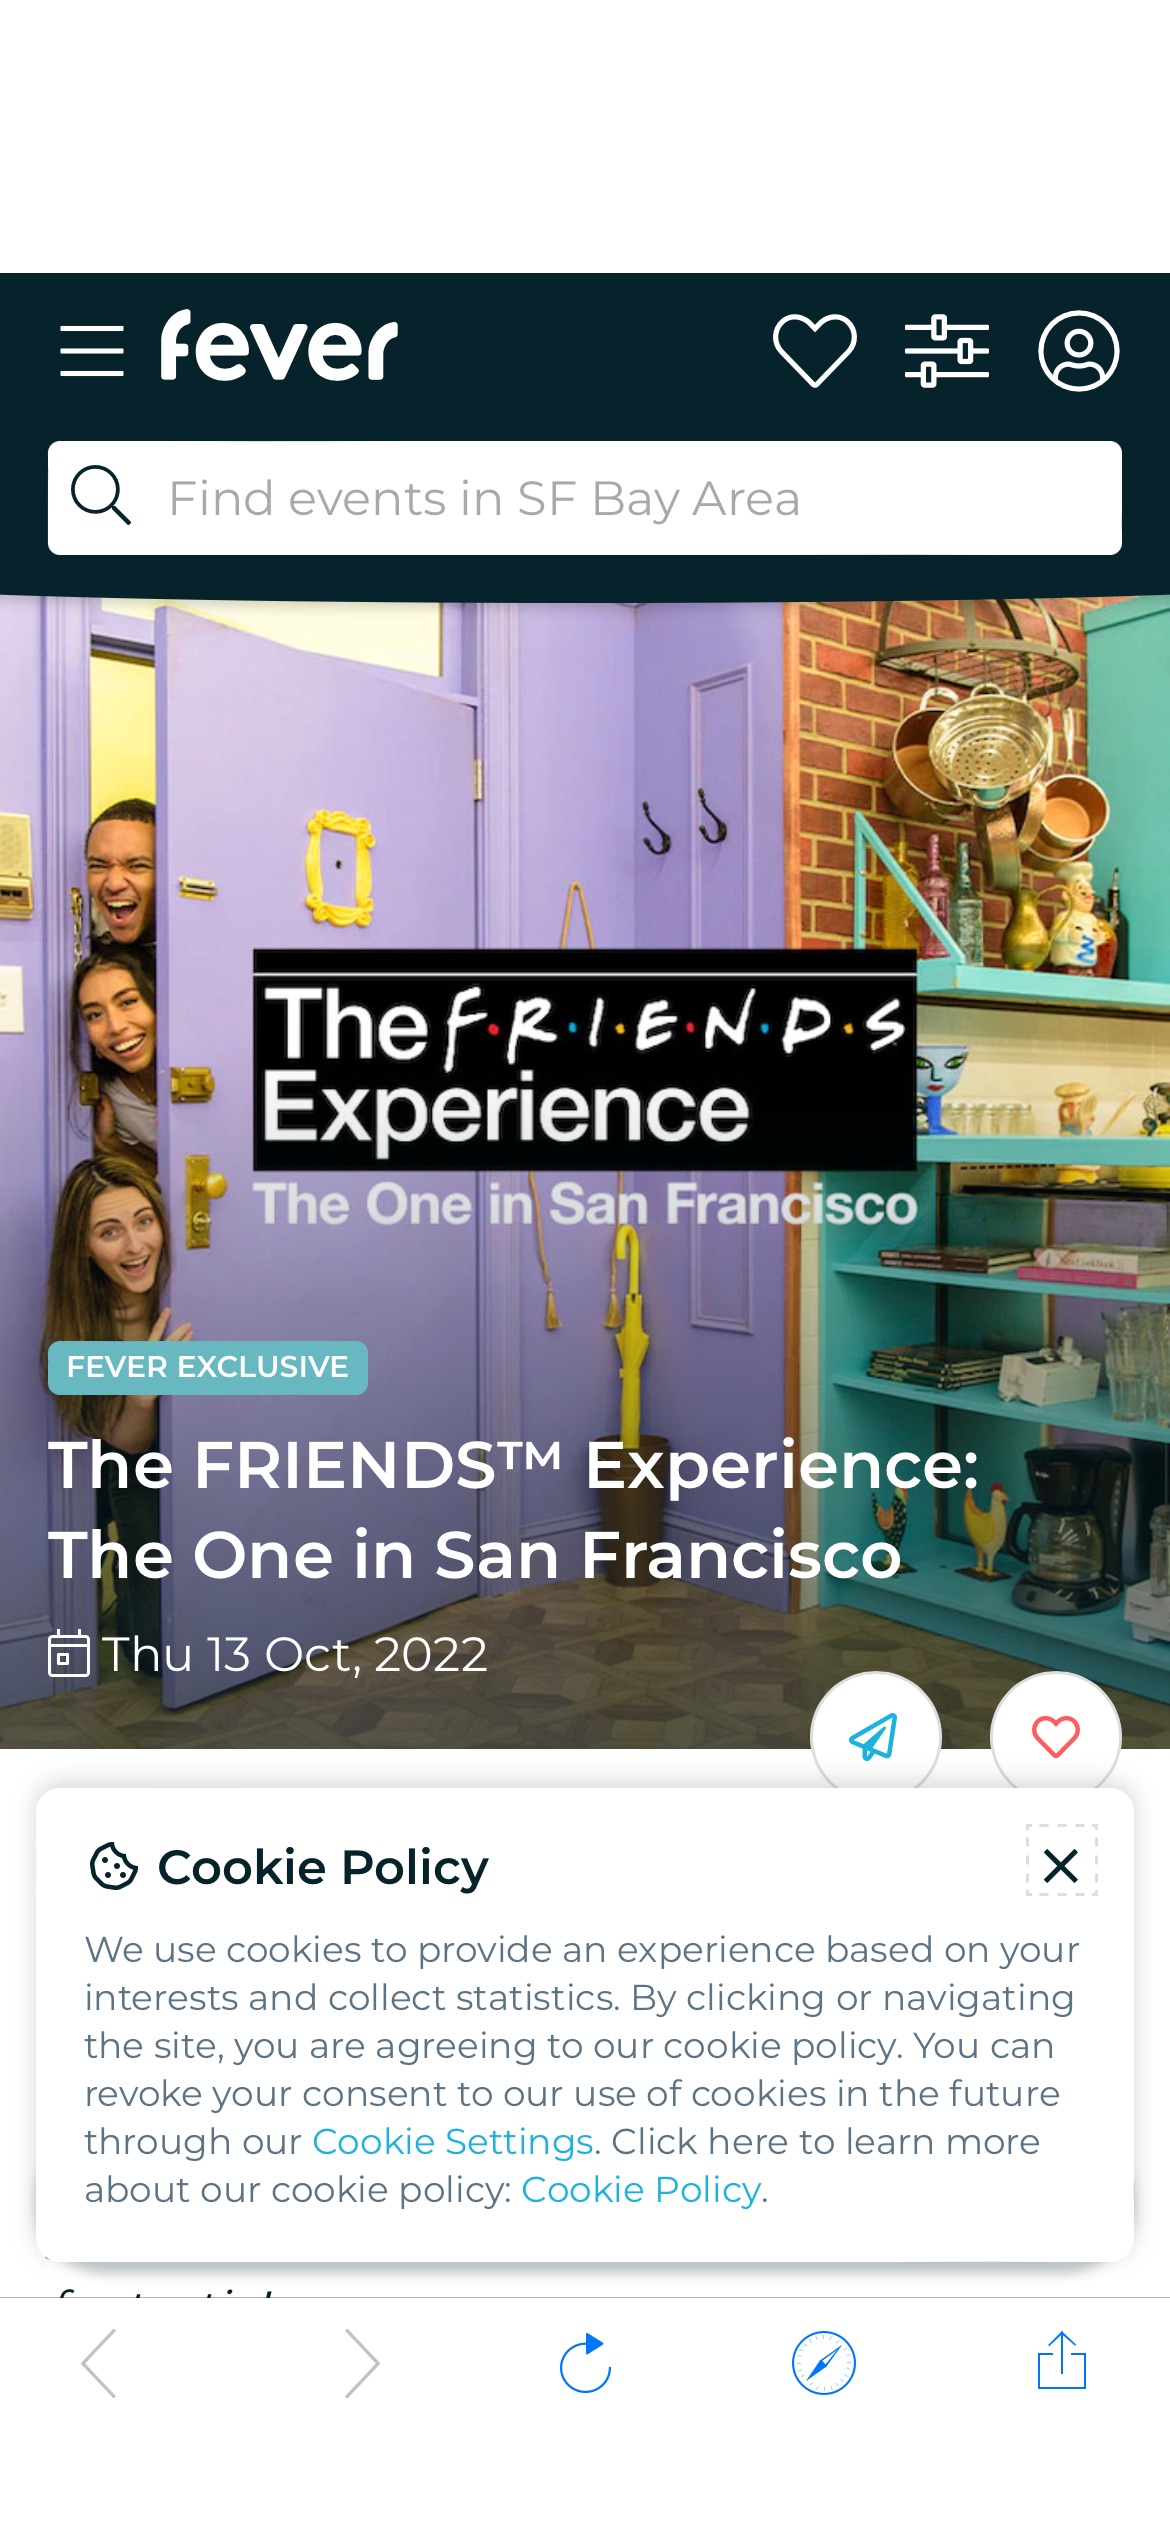 The FRIENDS™ Experience: The One in San Francisco - Tickets | Fever 旧金山体验展